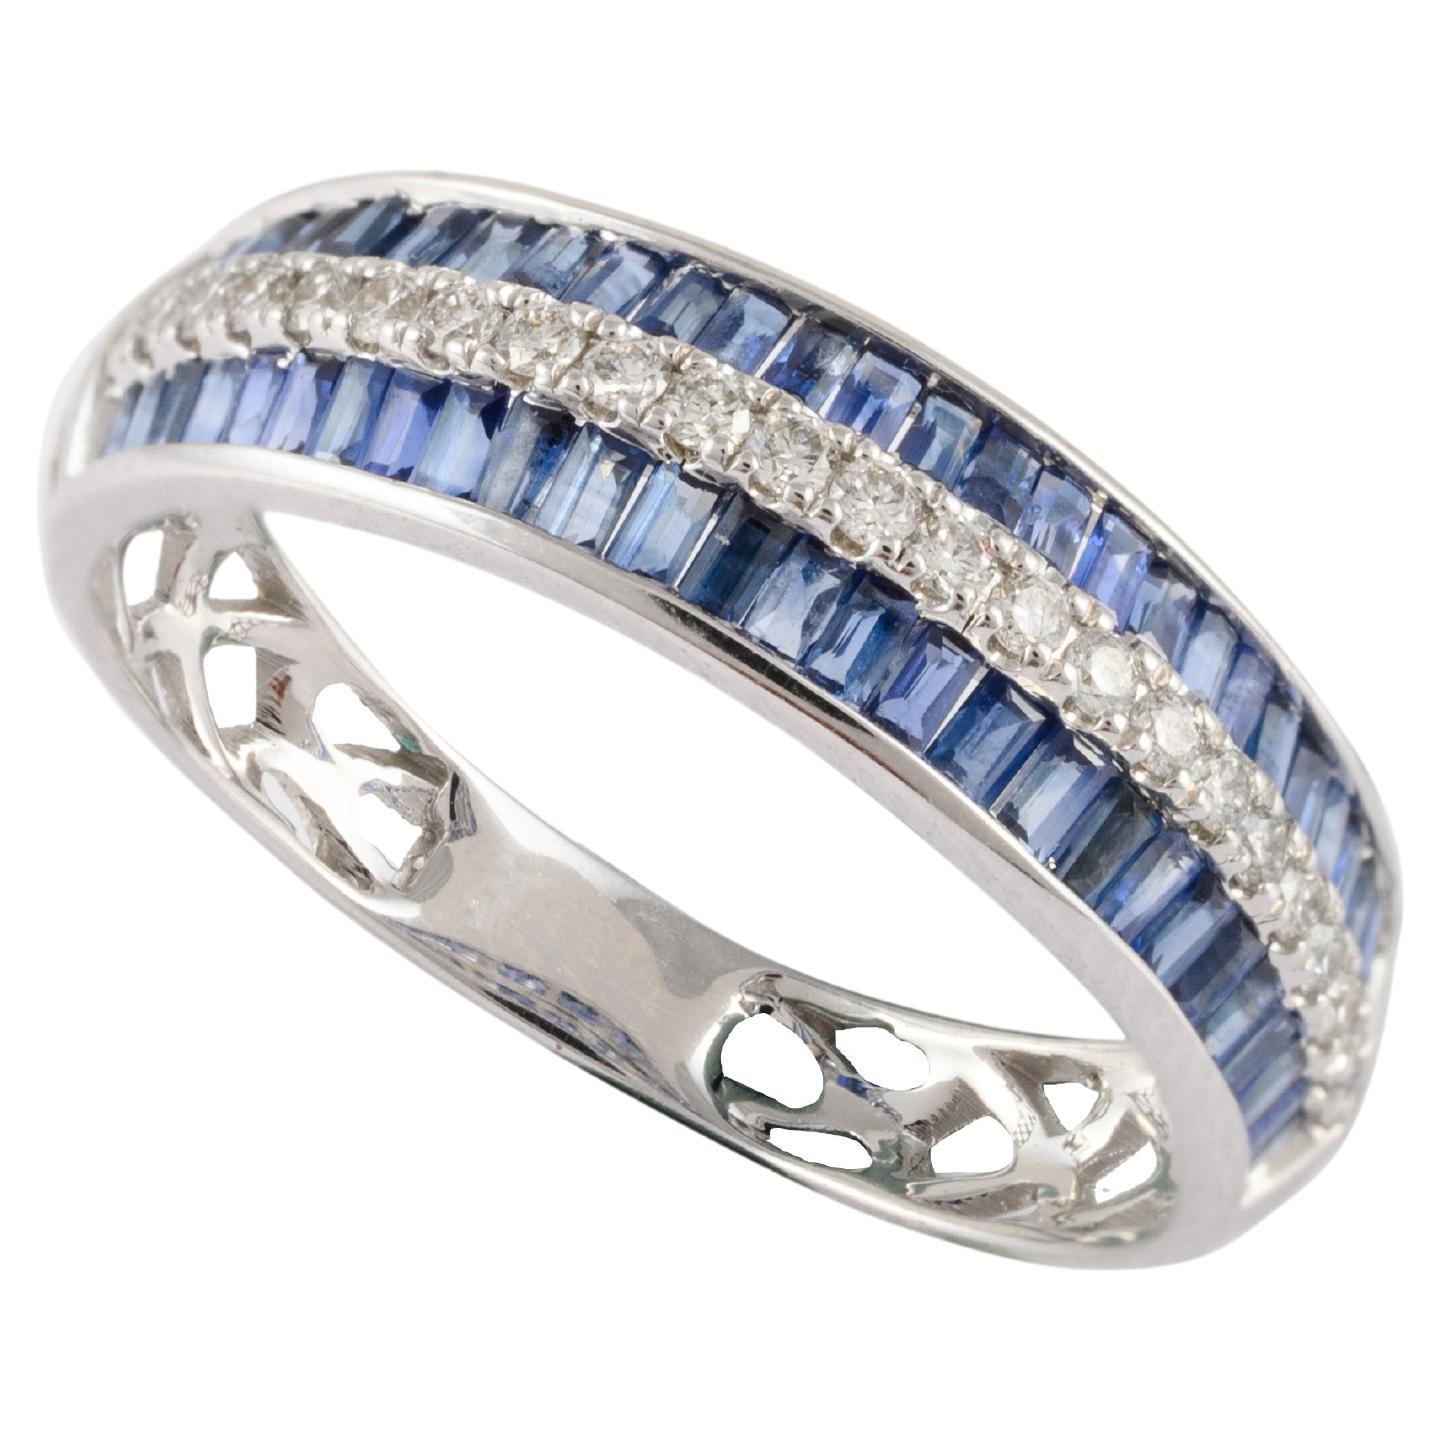 For Sale:  Blue Sapphire Channel Set Wedding Band with Diamonds in 18k Solid White Gold